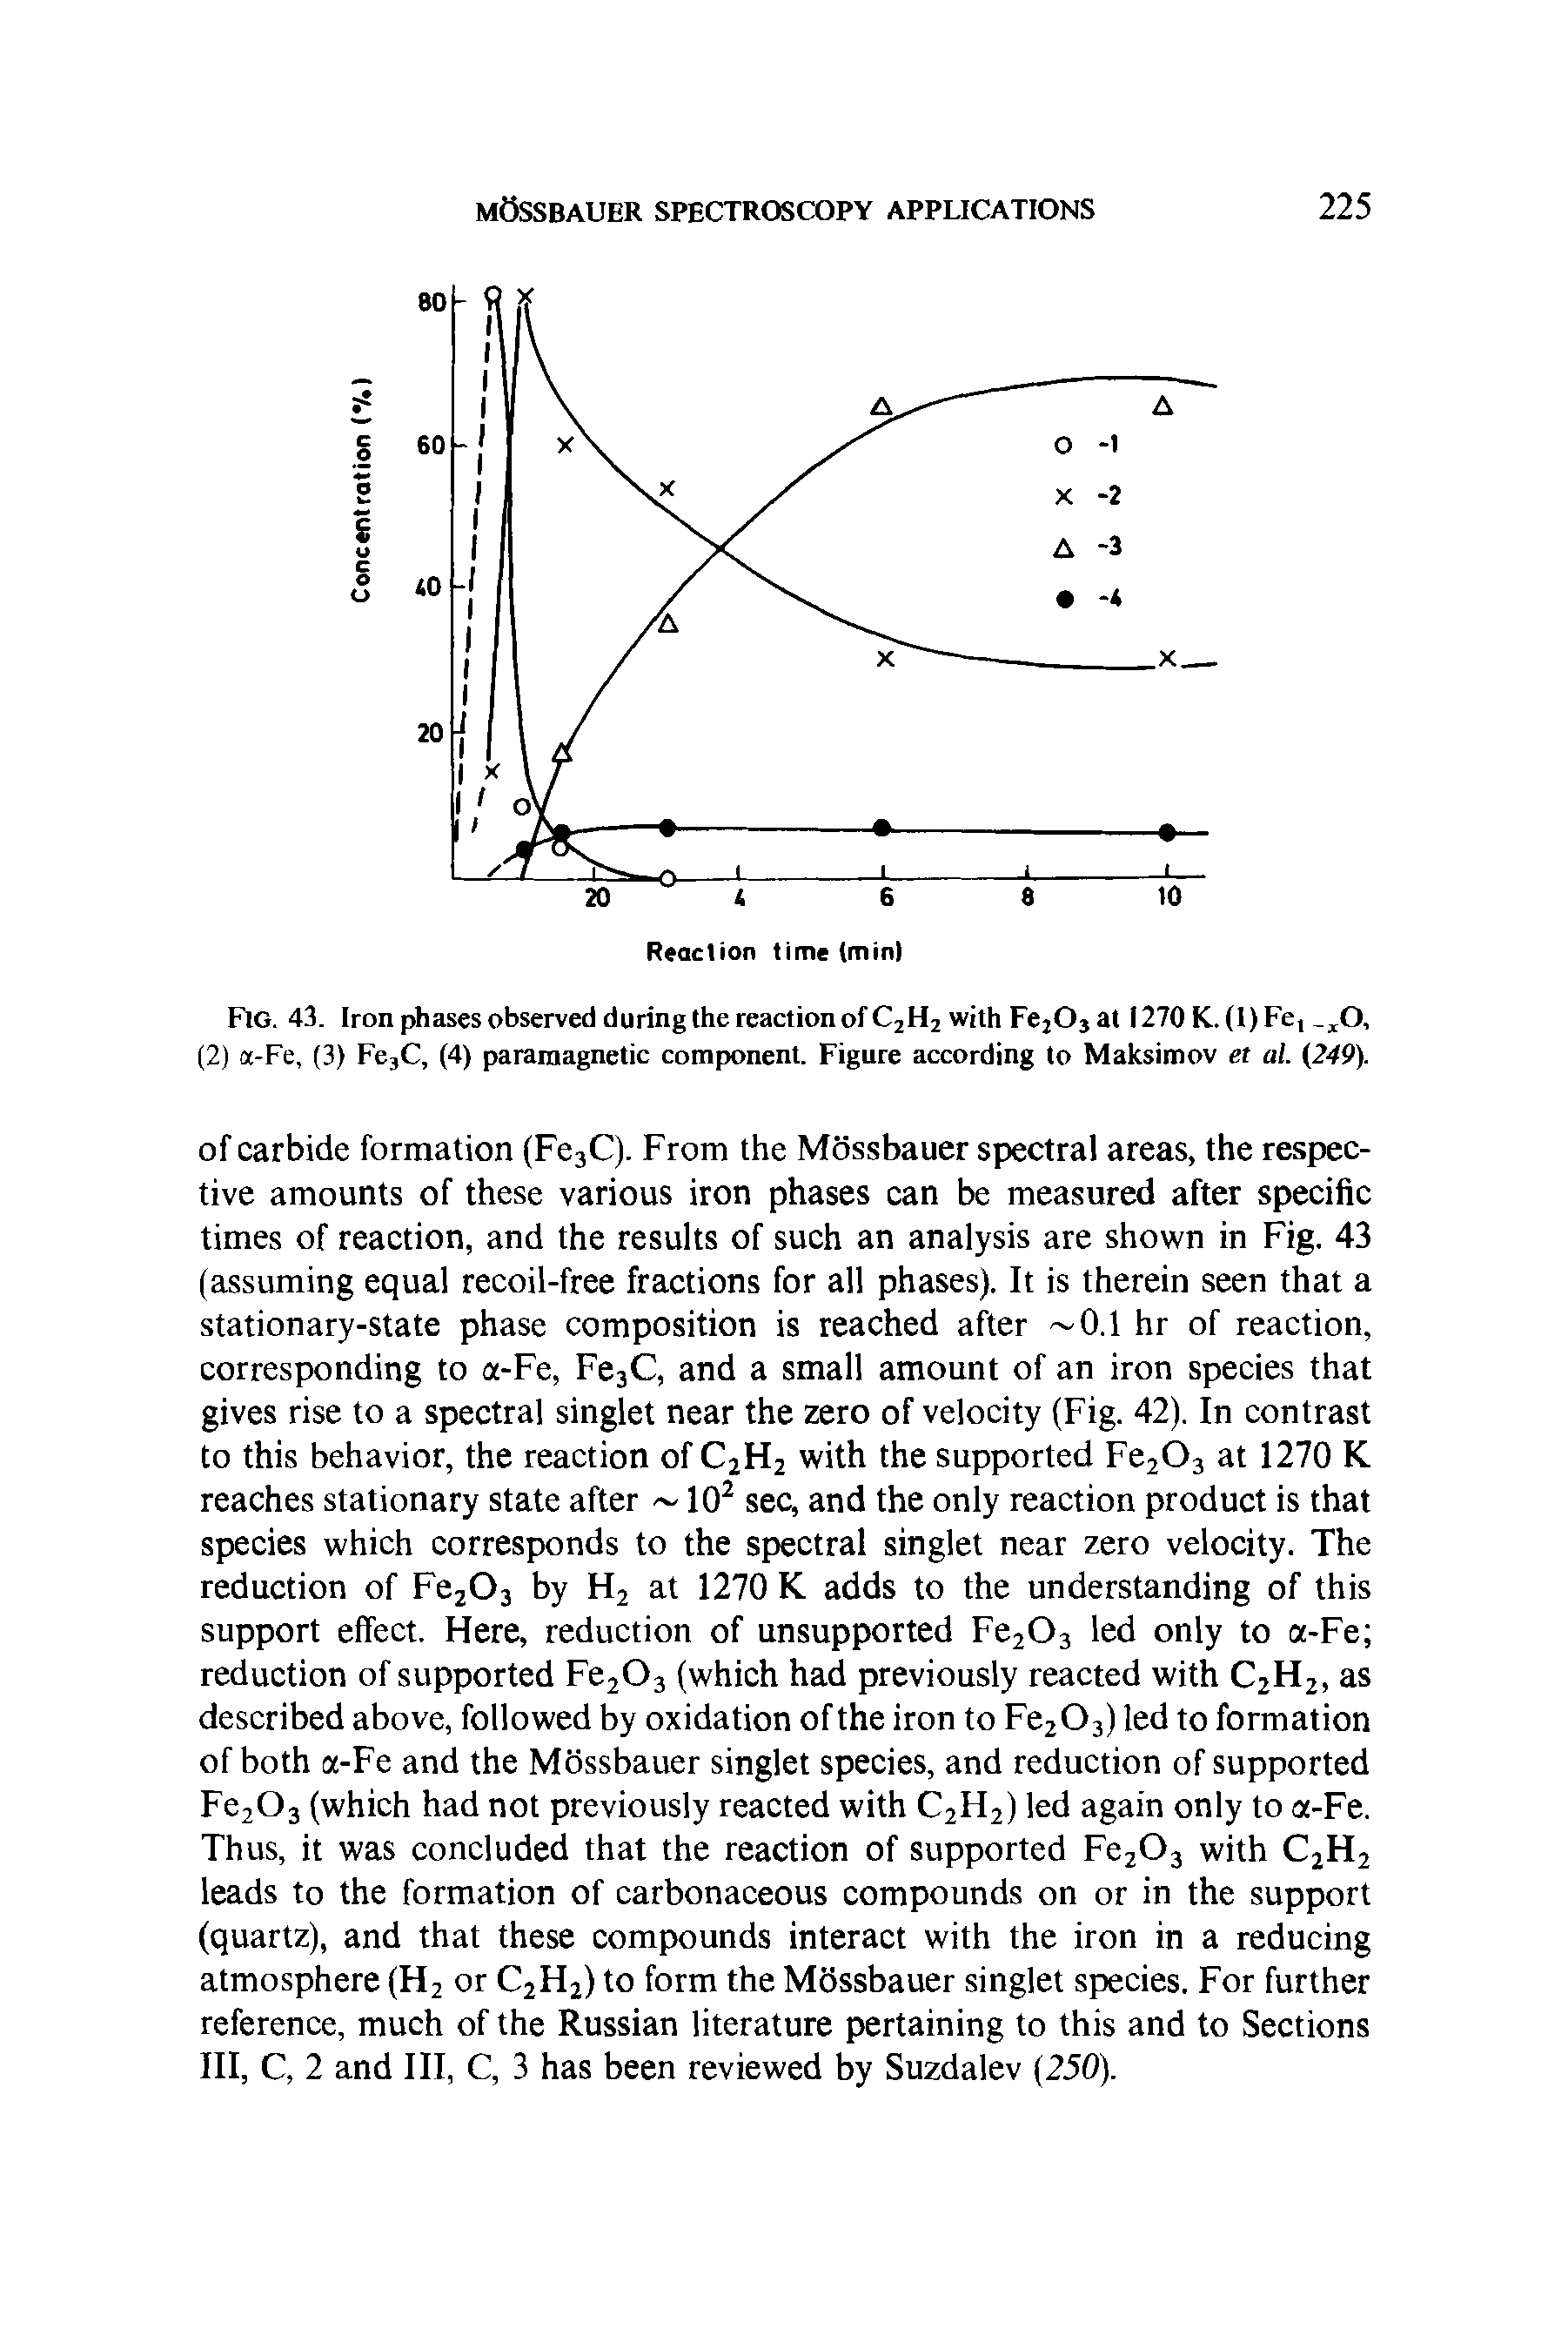 Fig. 43. Iron phases observed during the reaction of C2H2 with Fe2Oj at 1270 K. (I)Fc,, 0, (2) a-Fe, (3) Fe3C, (4) paramagnetic component. Figure according to Maksimov et al. (249).